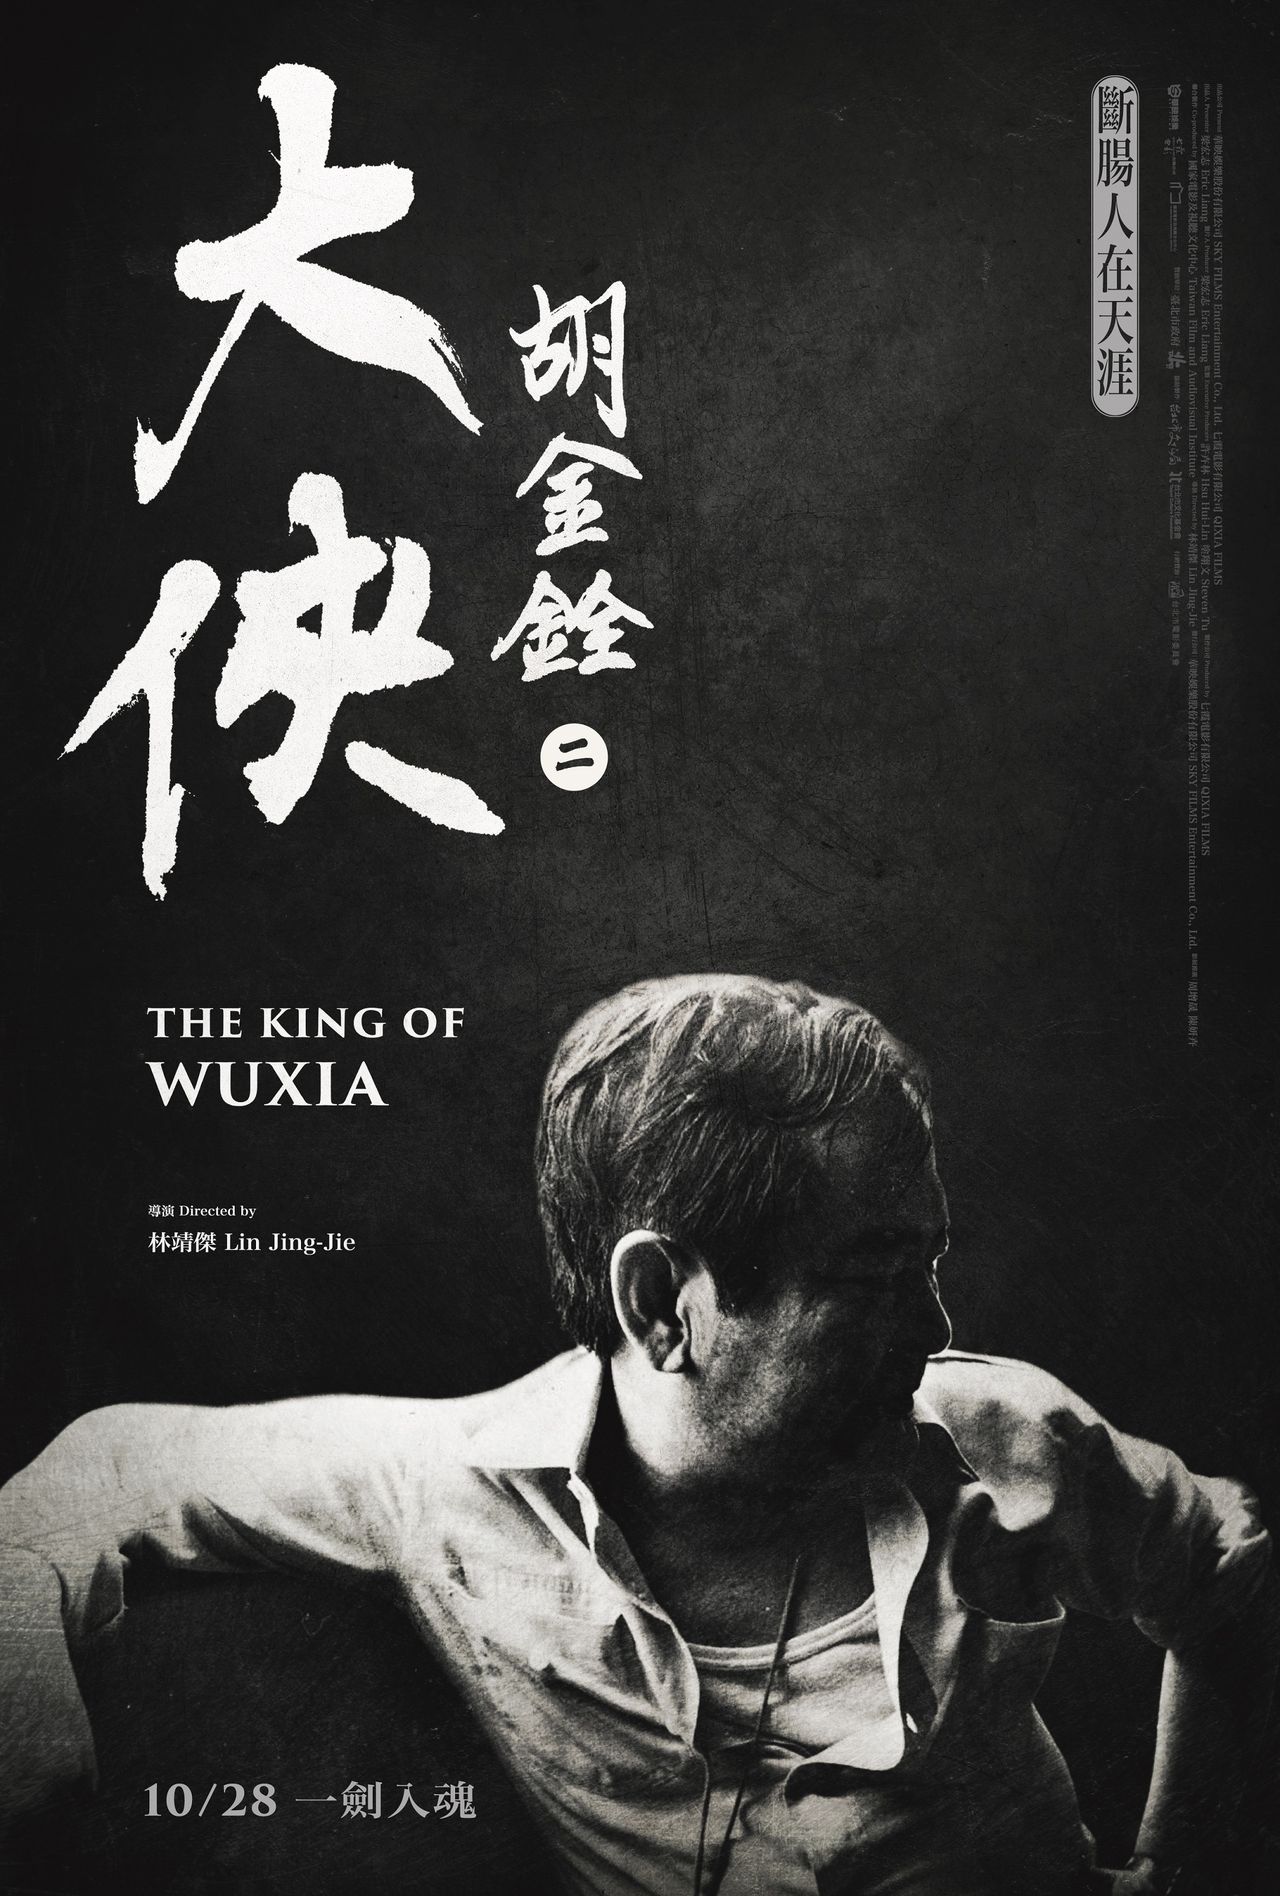 The King of Wuxia Part 2: The Heartbroken Man on the Horizon